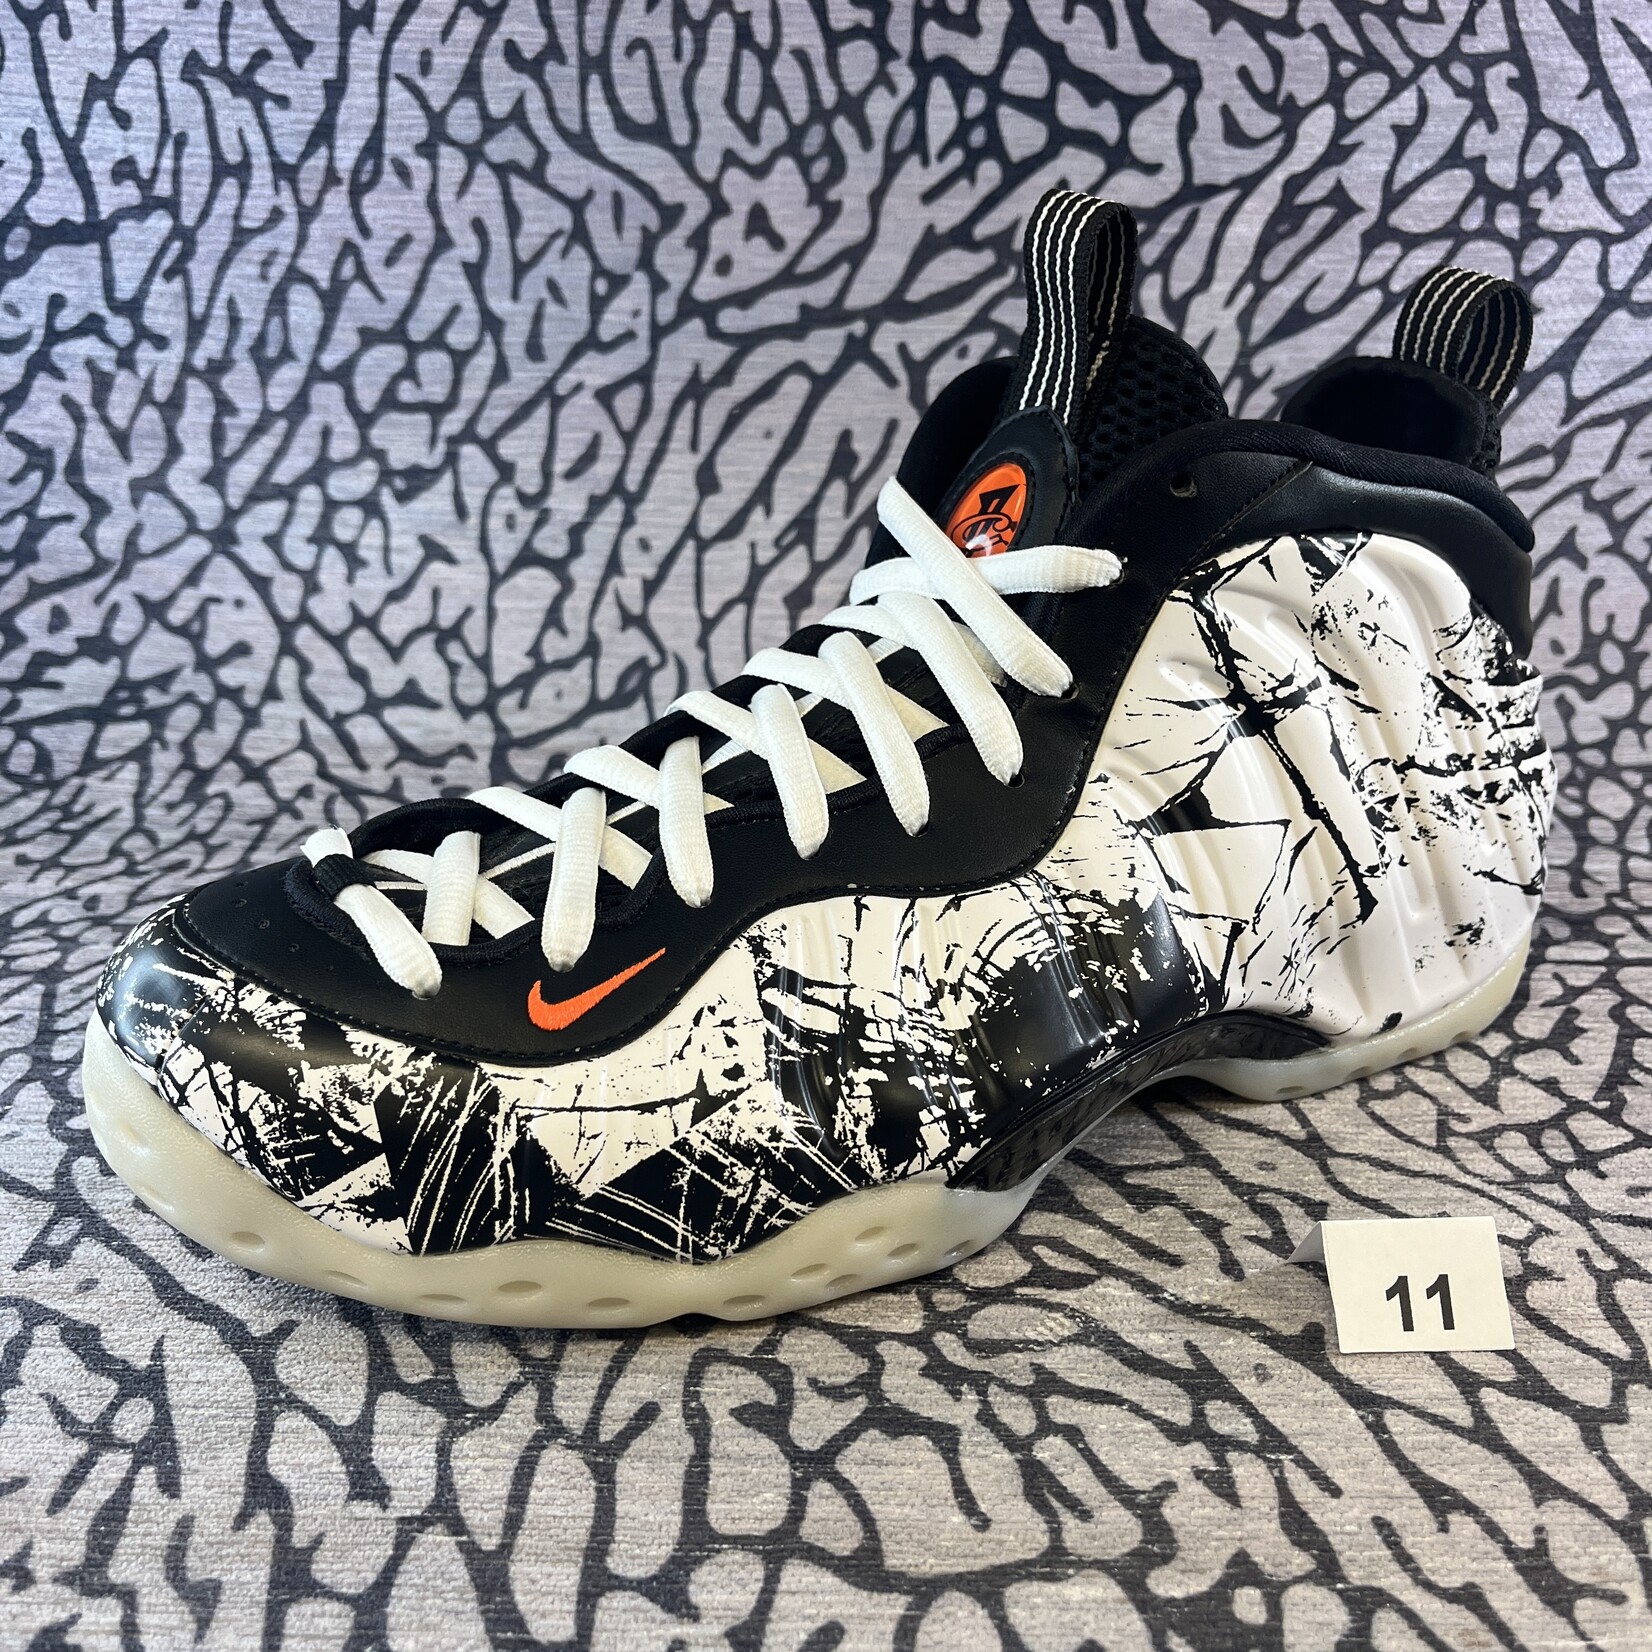 Nike Pre-owned Nike Air Foamposite One Shattered Backboard Rep Insoles